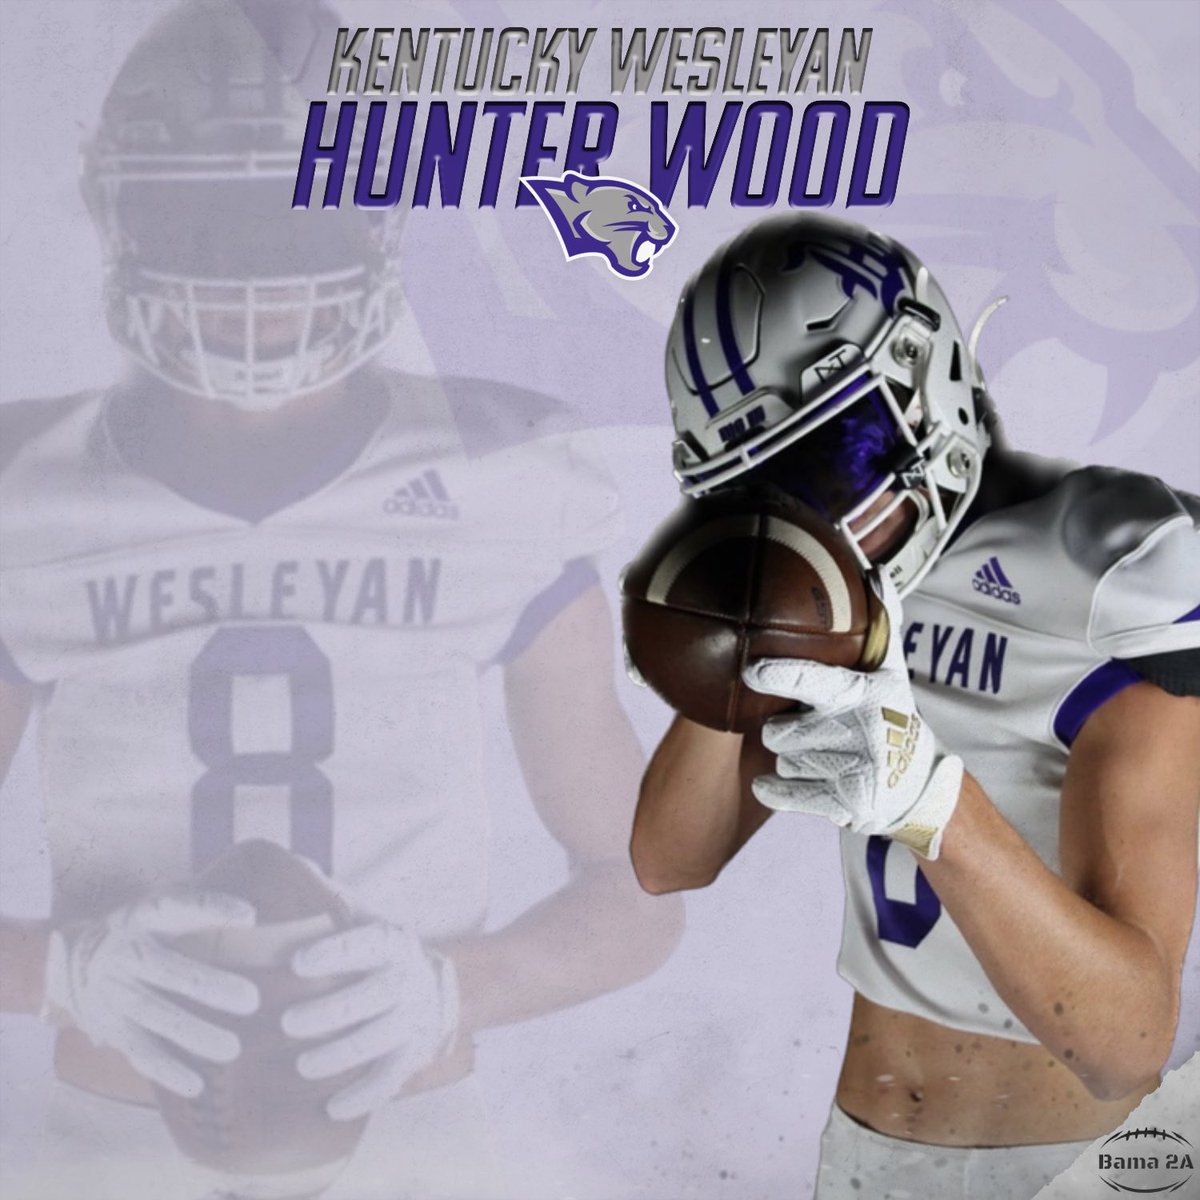 Congratulations to @HunterWood06❗️ He was offered by @kwc_football❗️